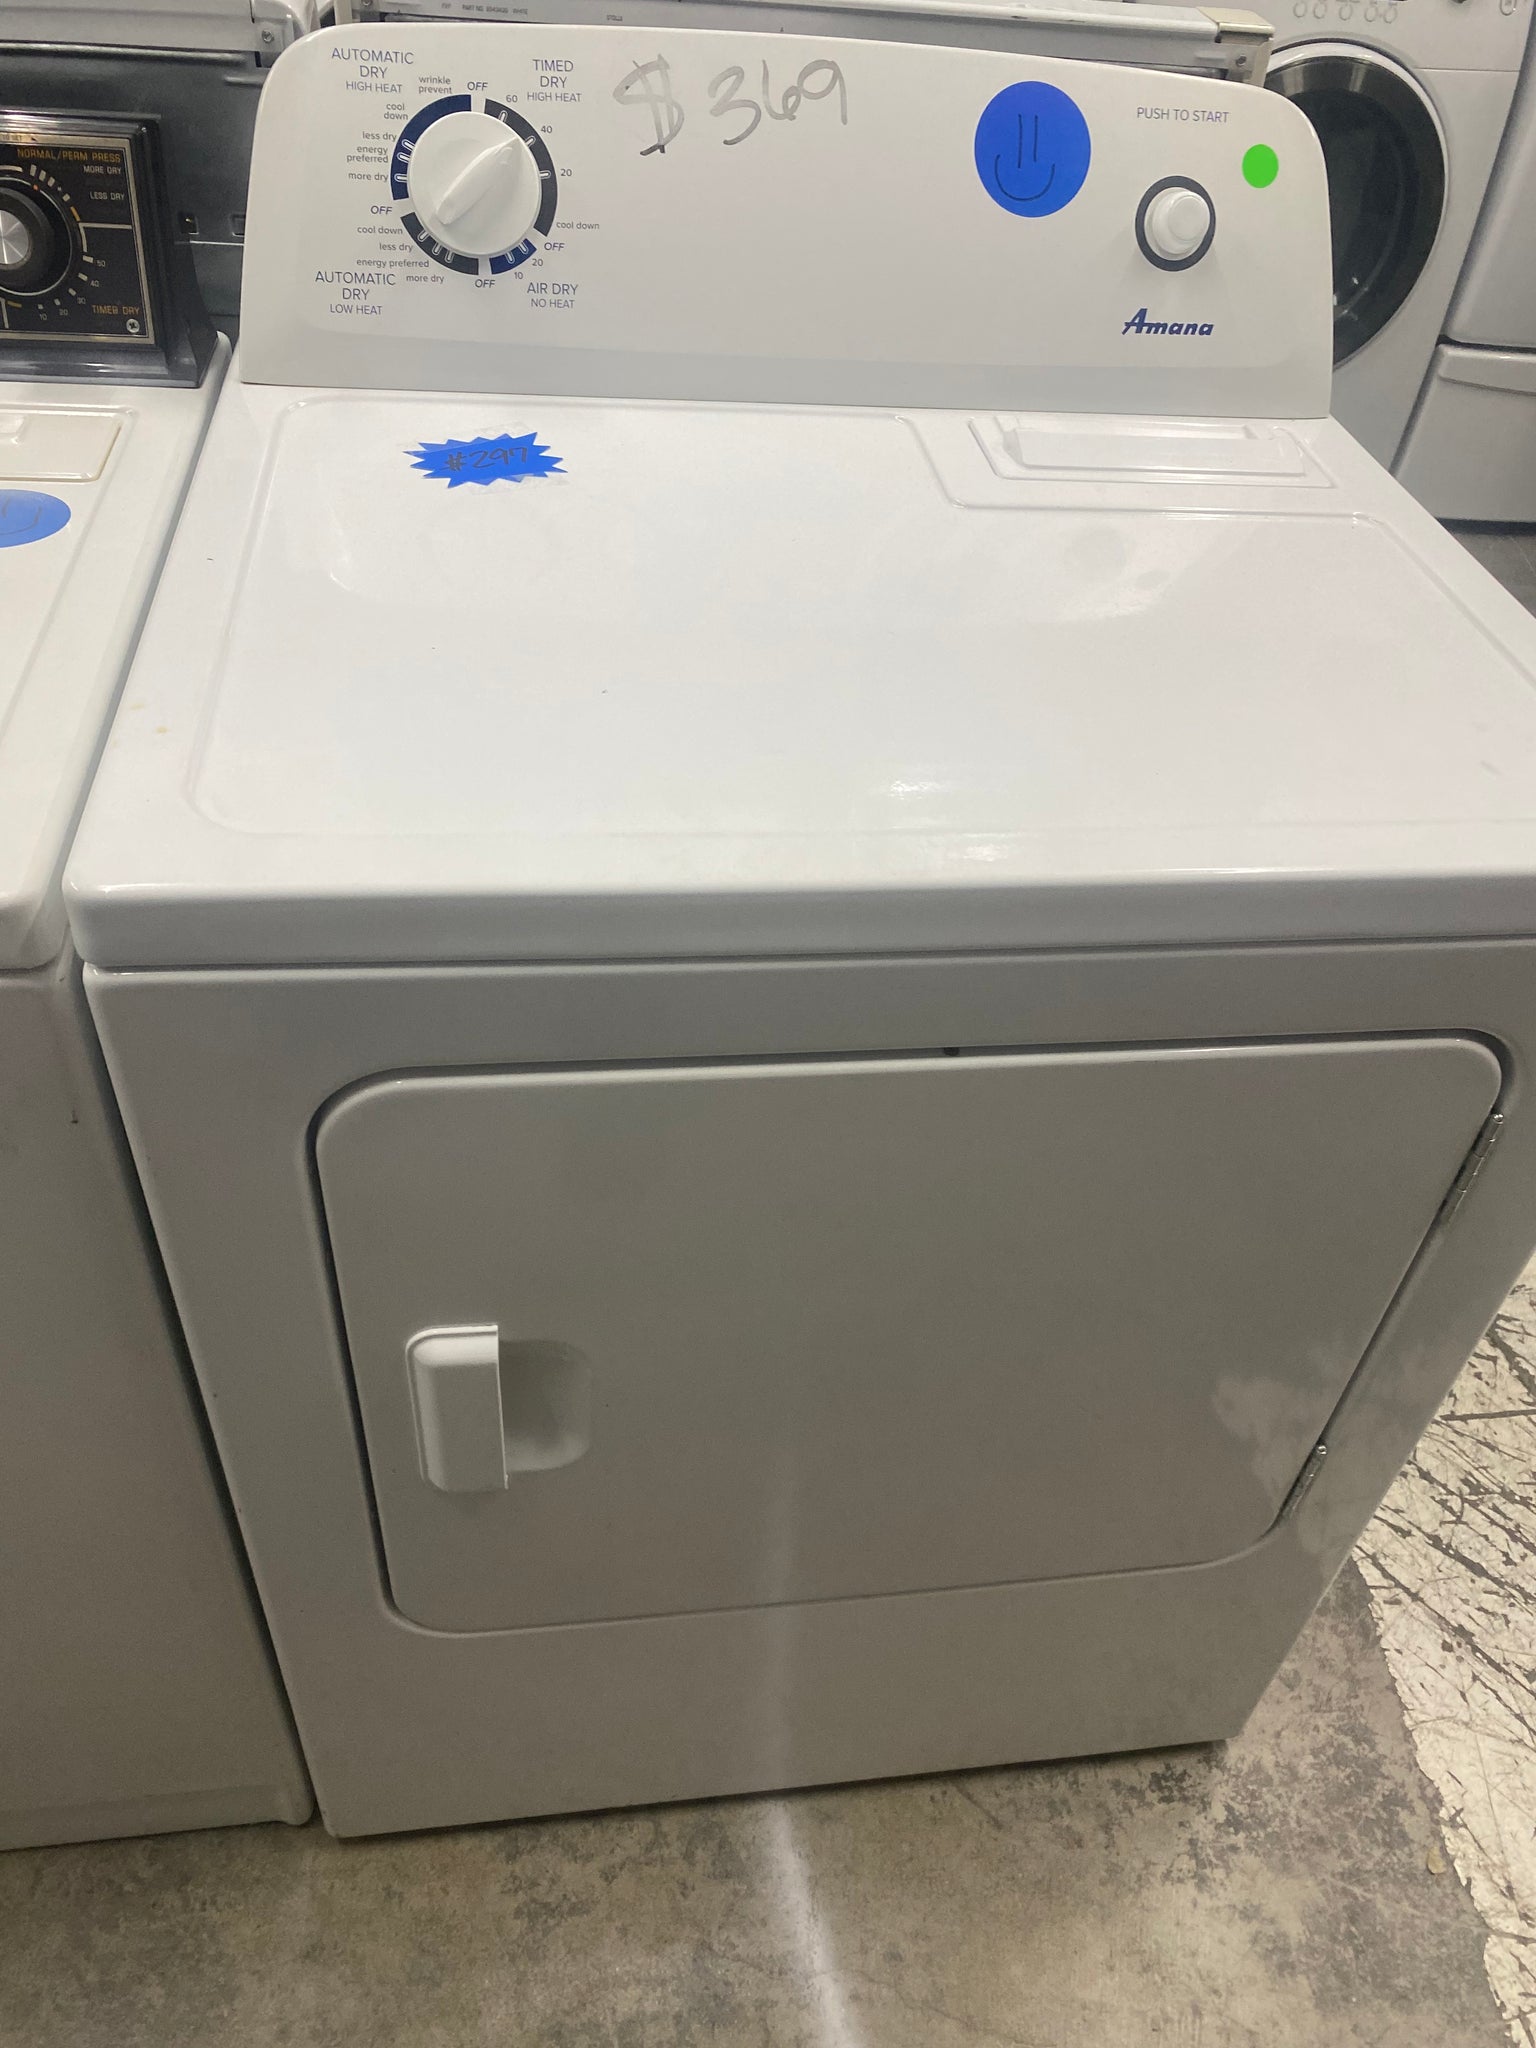 USED ELECTRIC TOP LOAD DRYERS